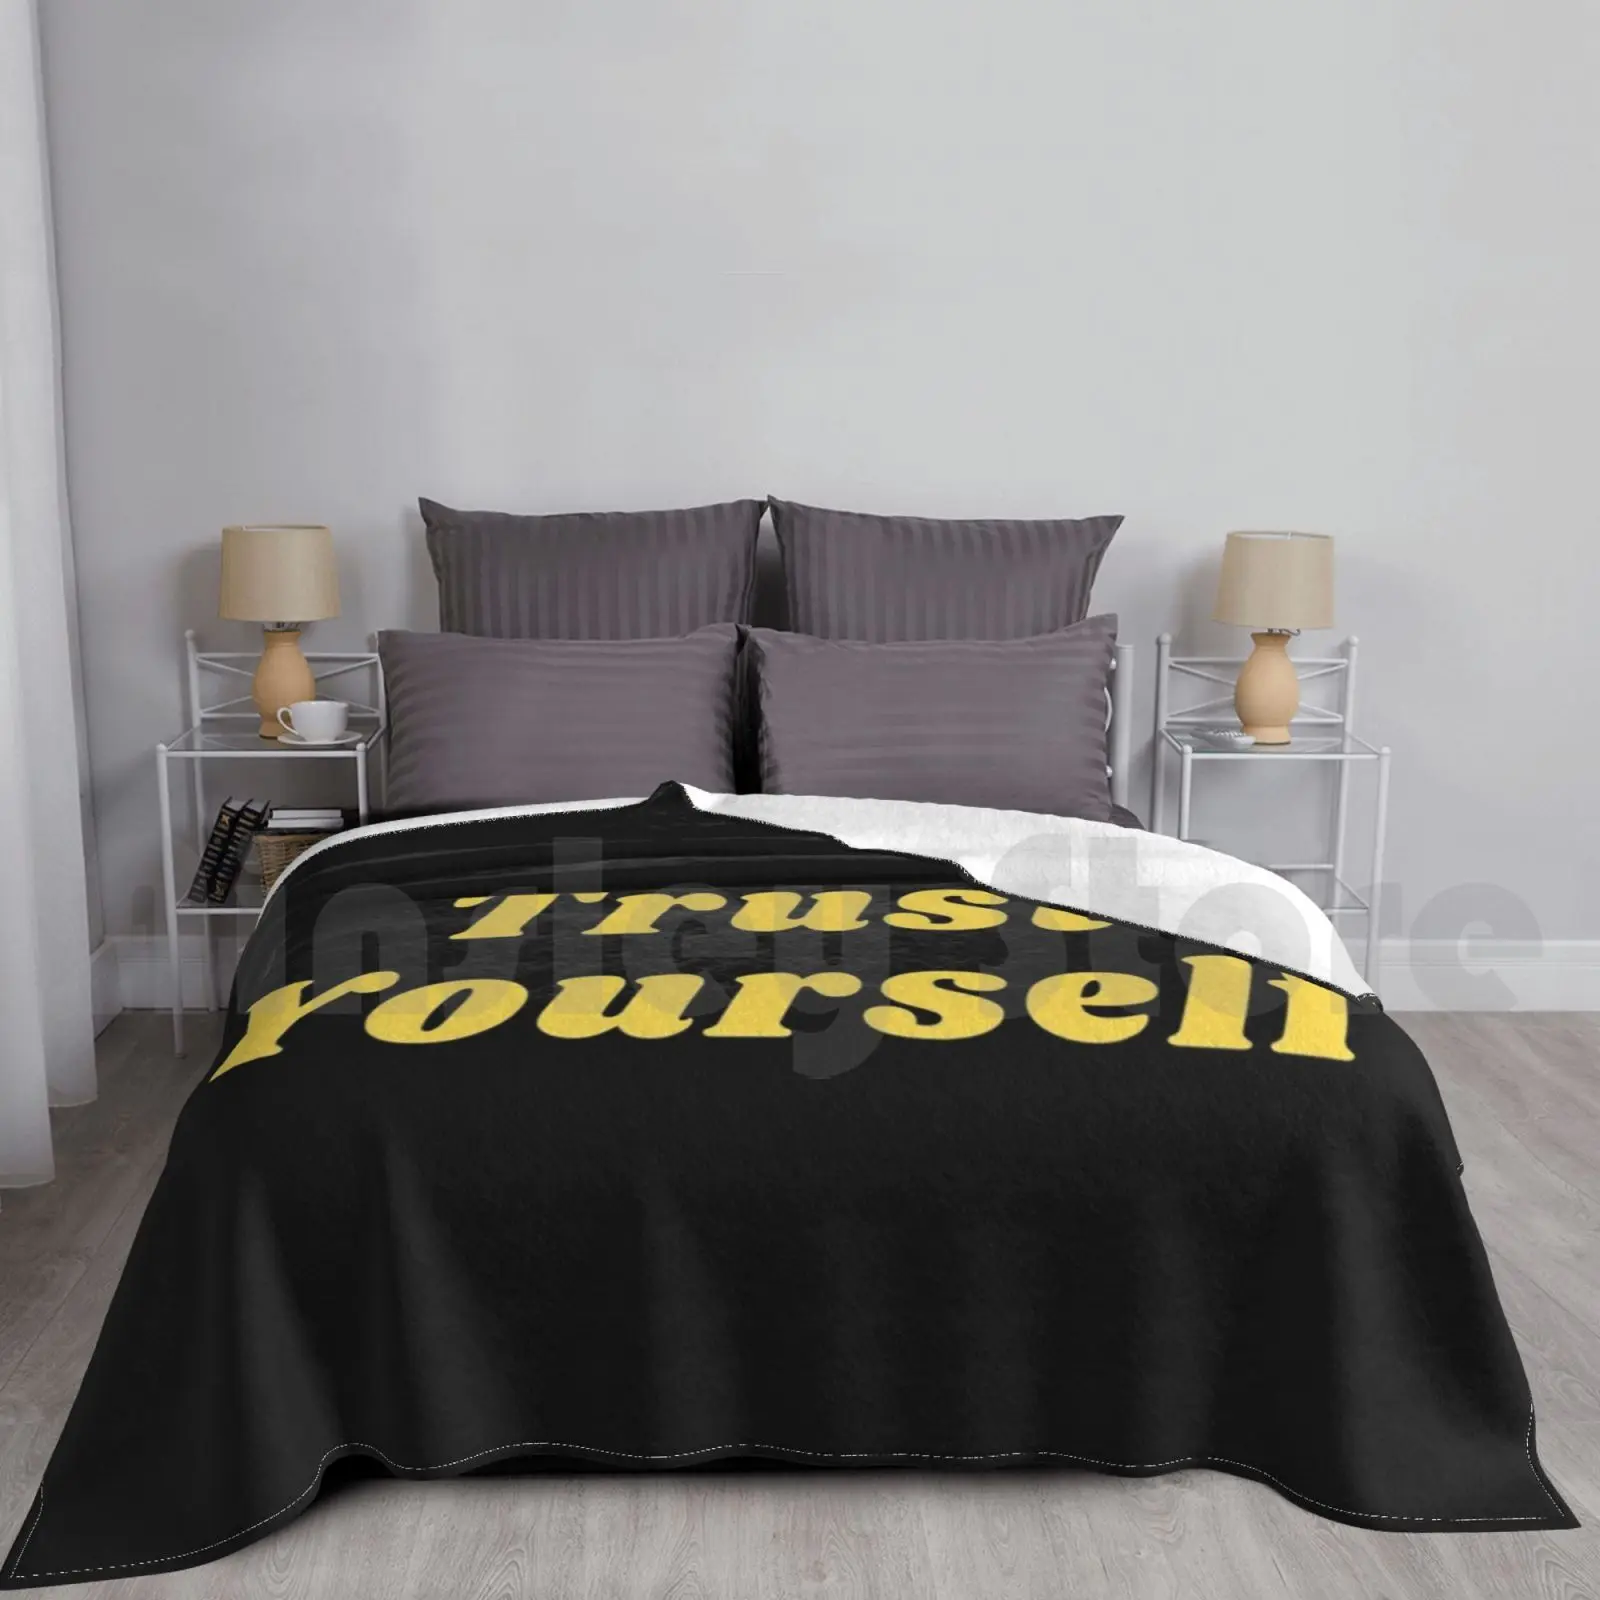 

Trust Yourself Blanket For Sofa Bed Travel Positivity Happiness Kindness Quote Quotes Love Spiritual Growth